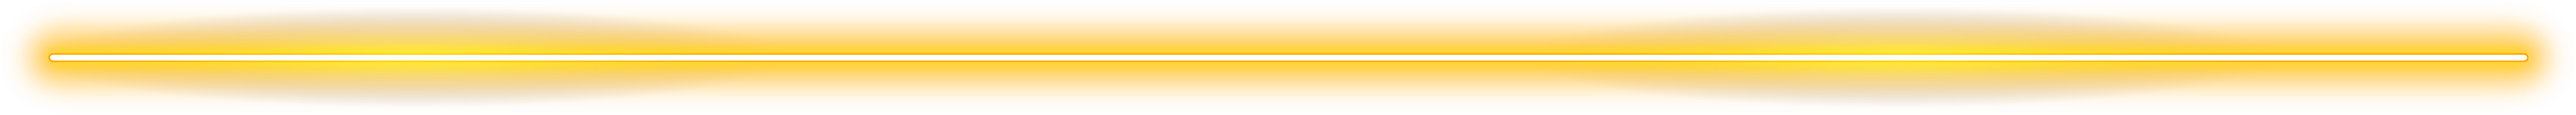 Neon glowing line divider in yellow light